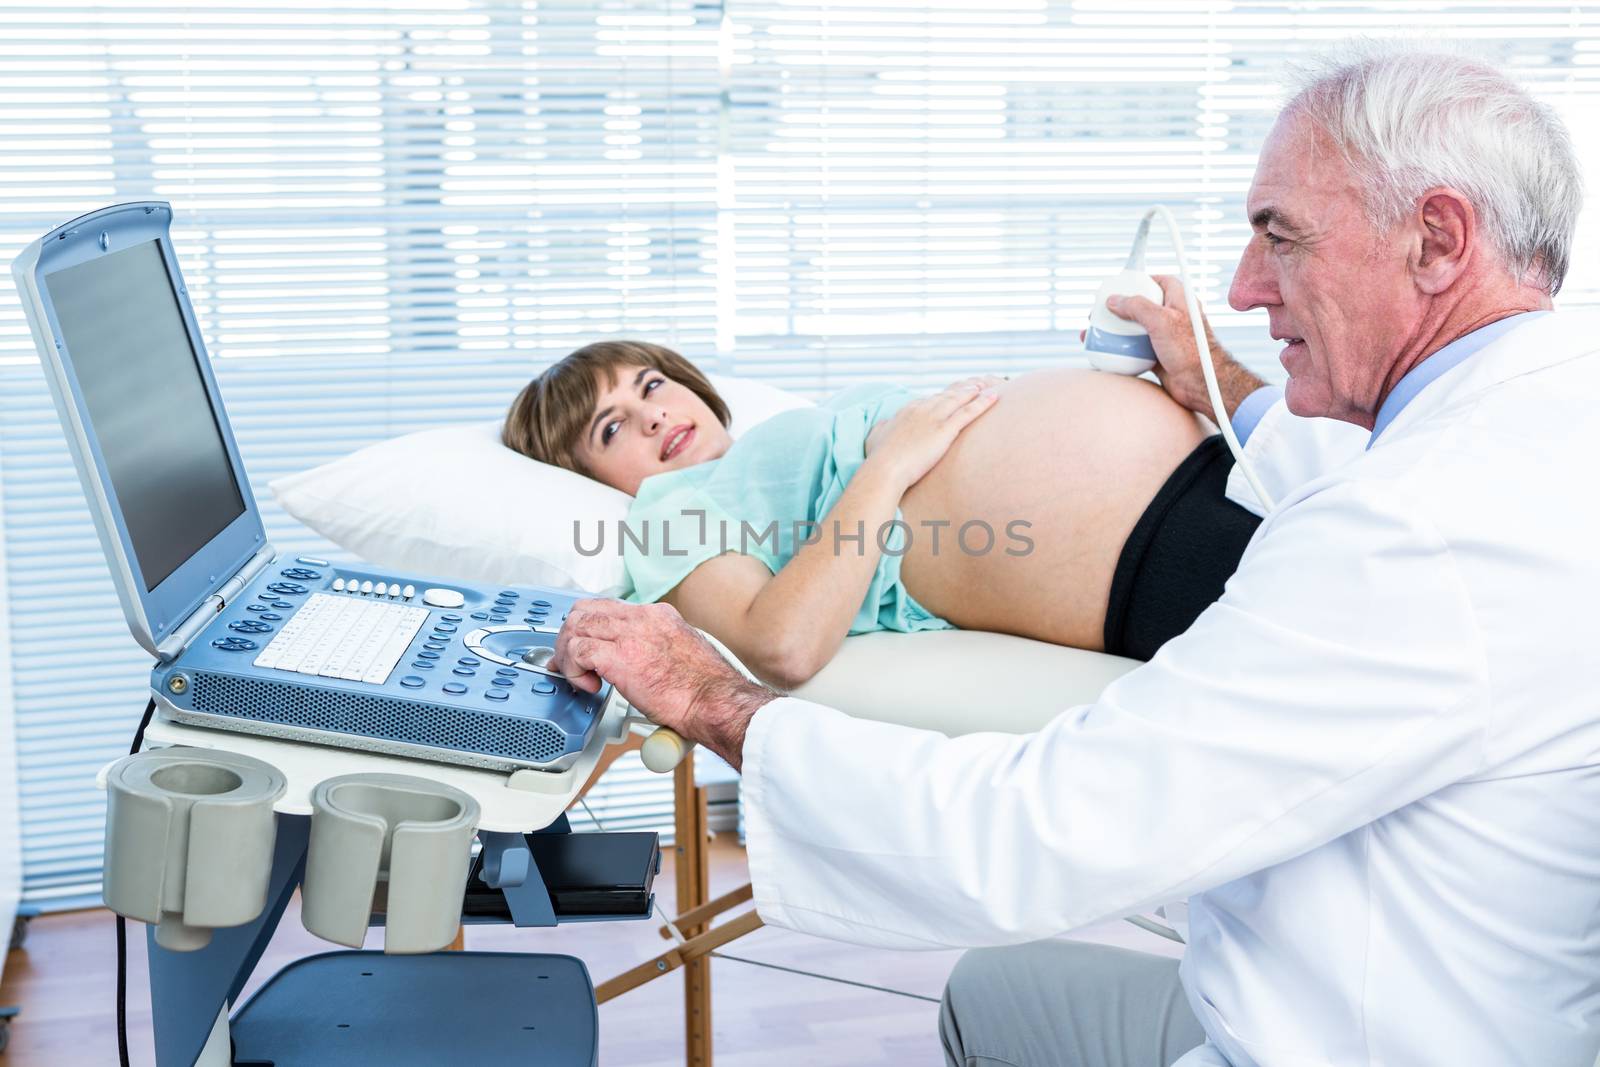 Pregnant woman and doctor looking at scan machine while performing ultrasound test